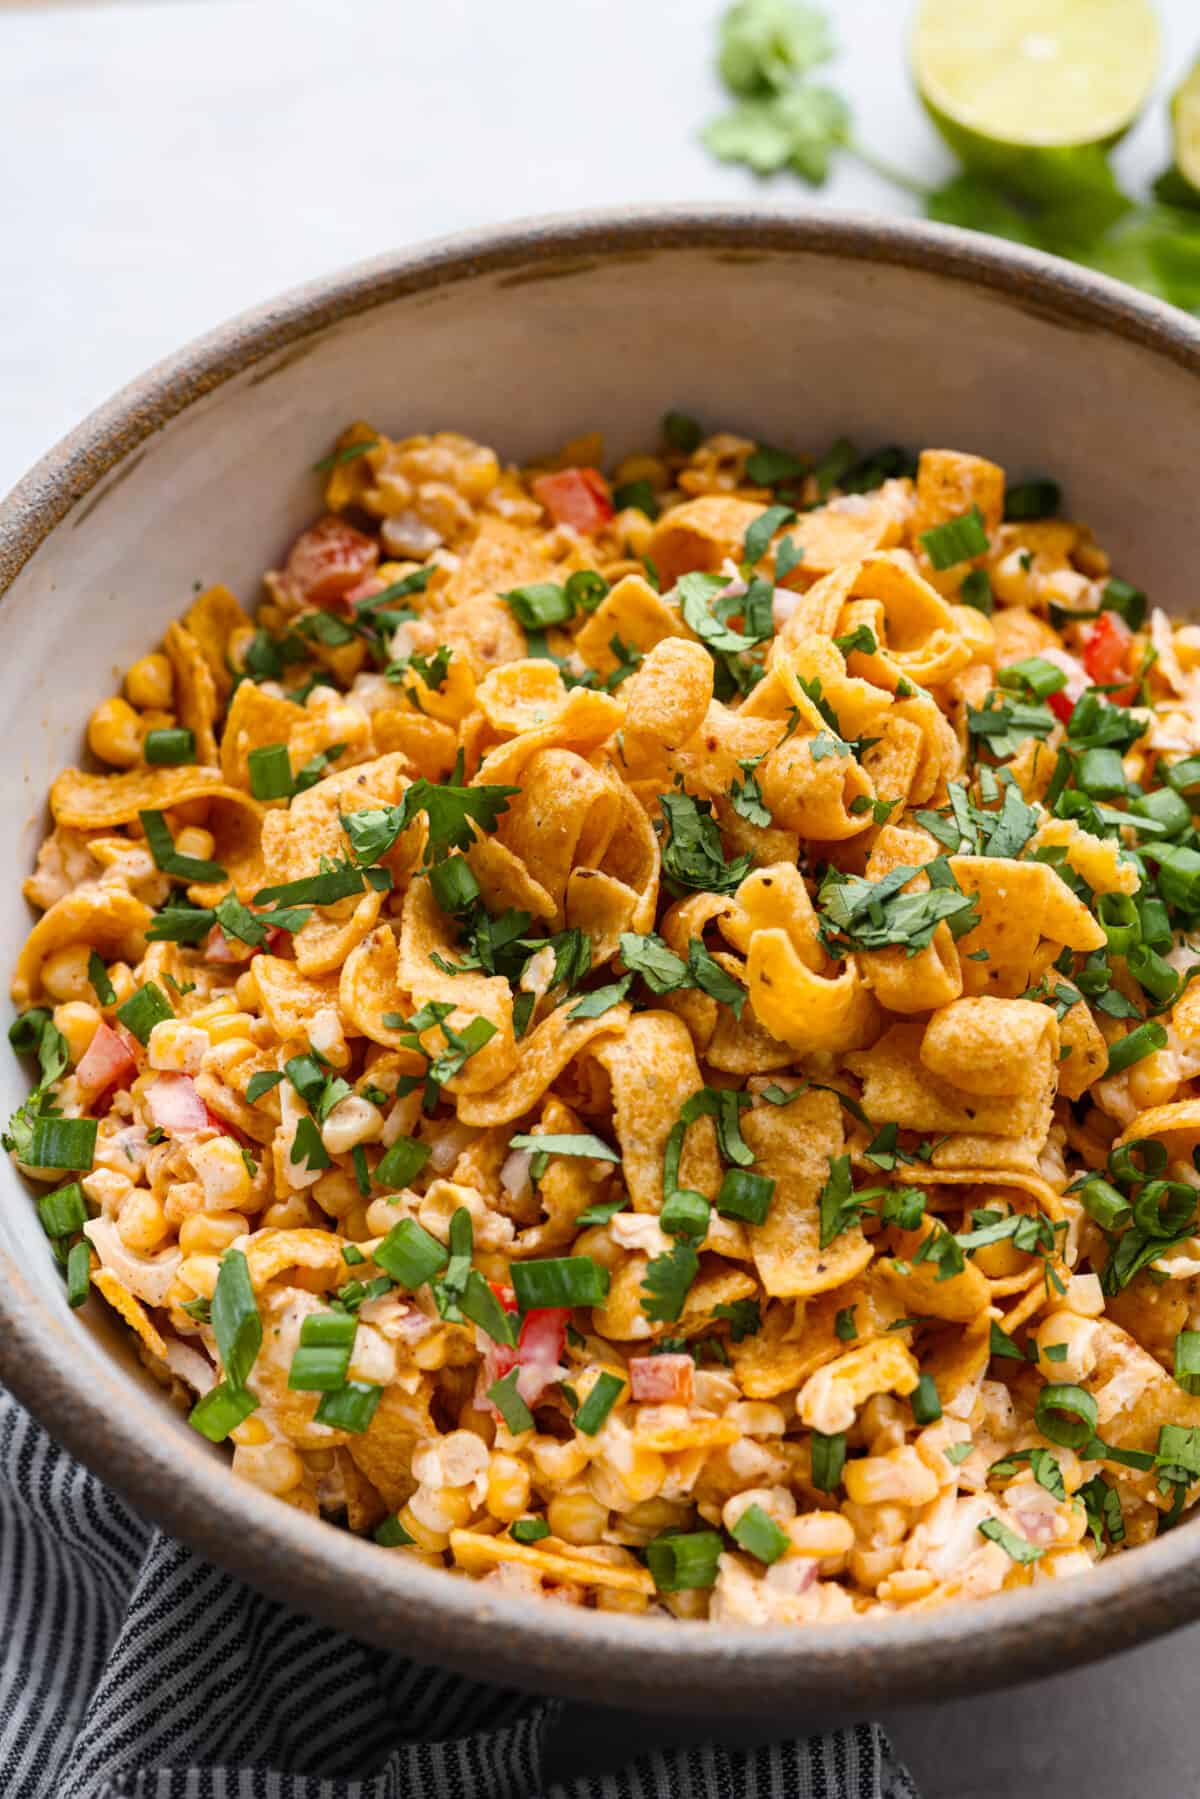 Close view of frito corn salad in a large bowl garnished with cilantro and green onions.